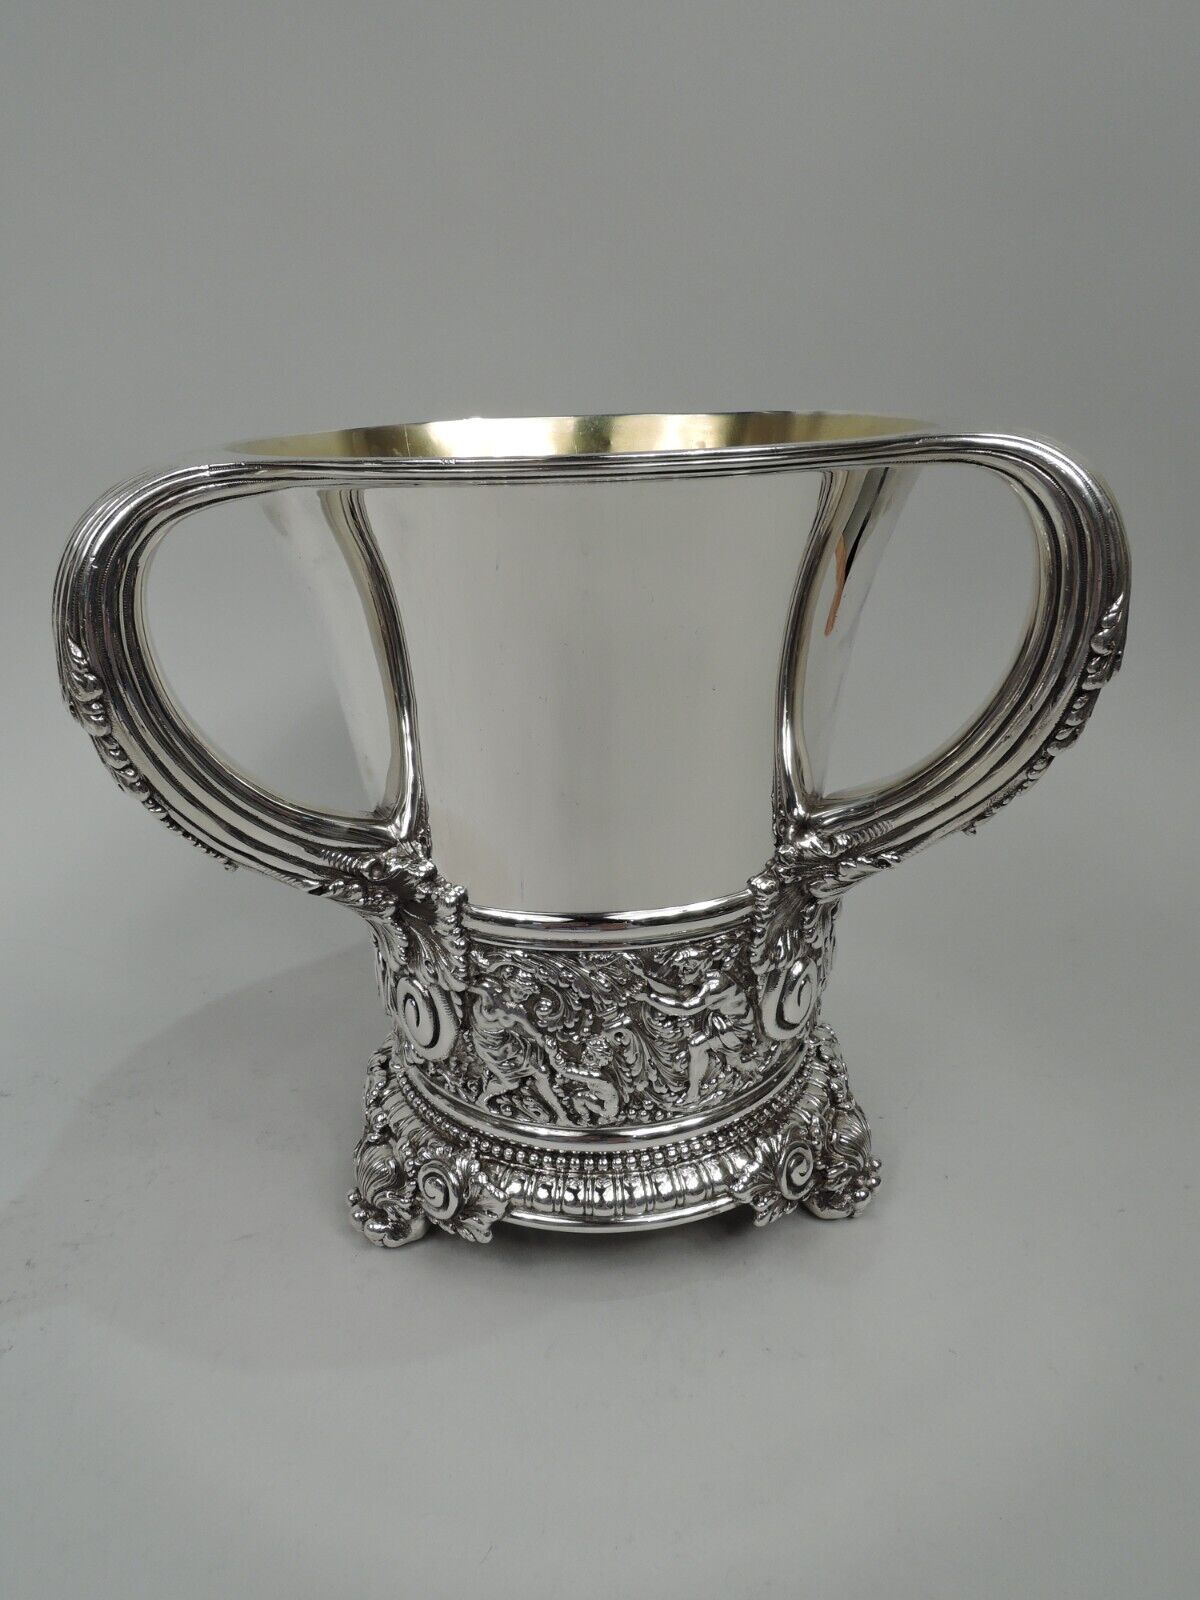 Tiffany Olympian Wine Cooler 6904 Antique Trophy Cup American Sterling Silver